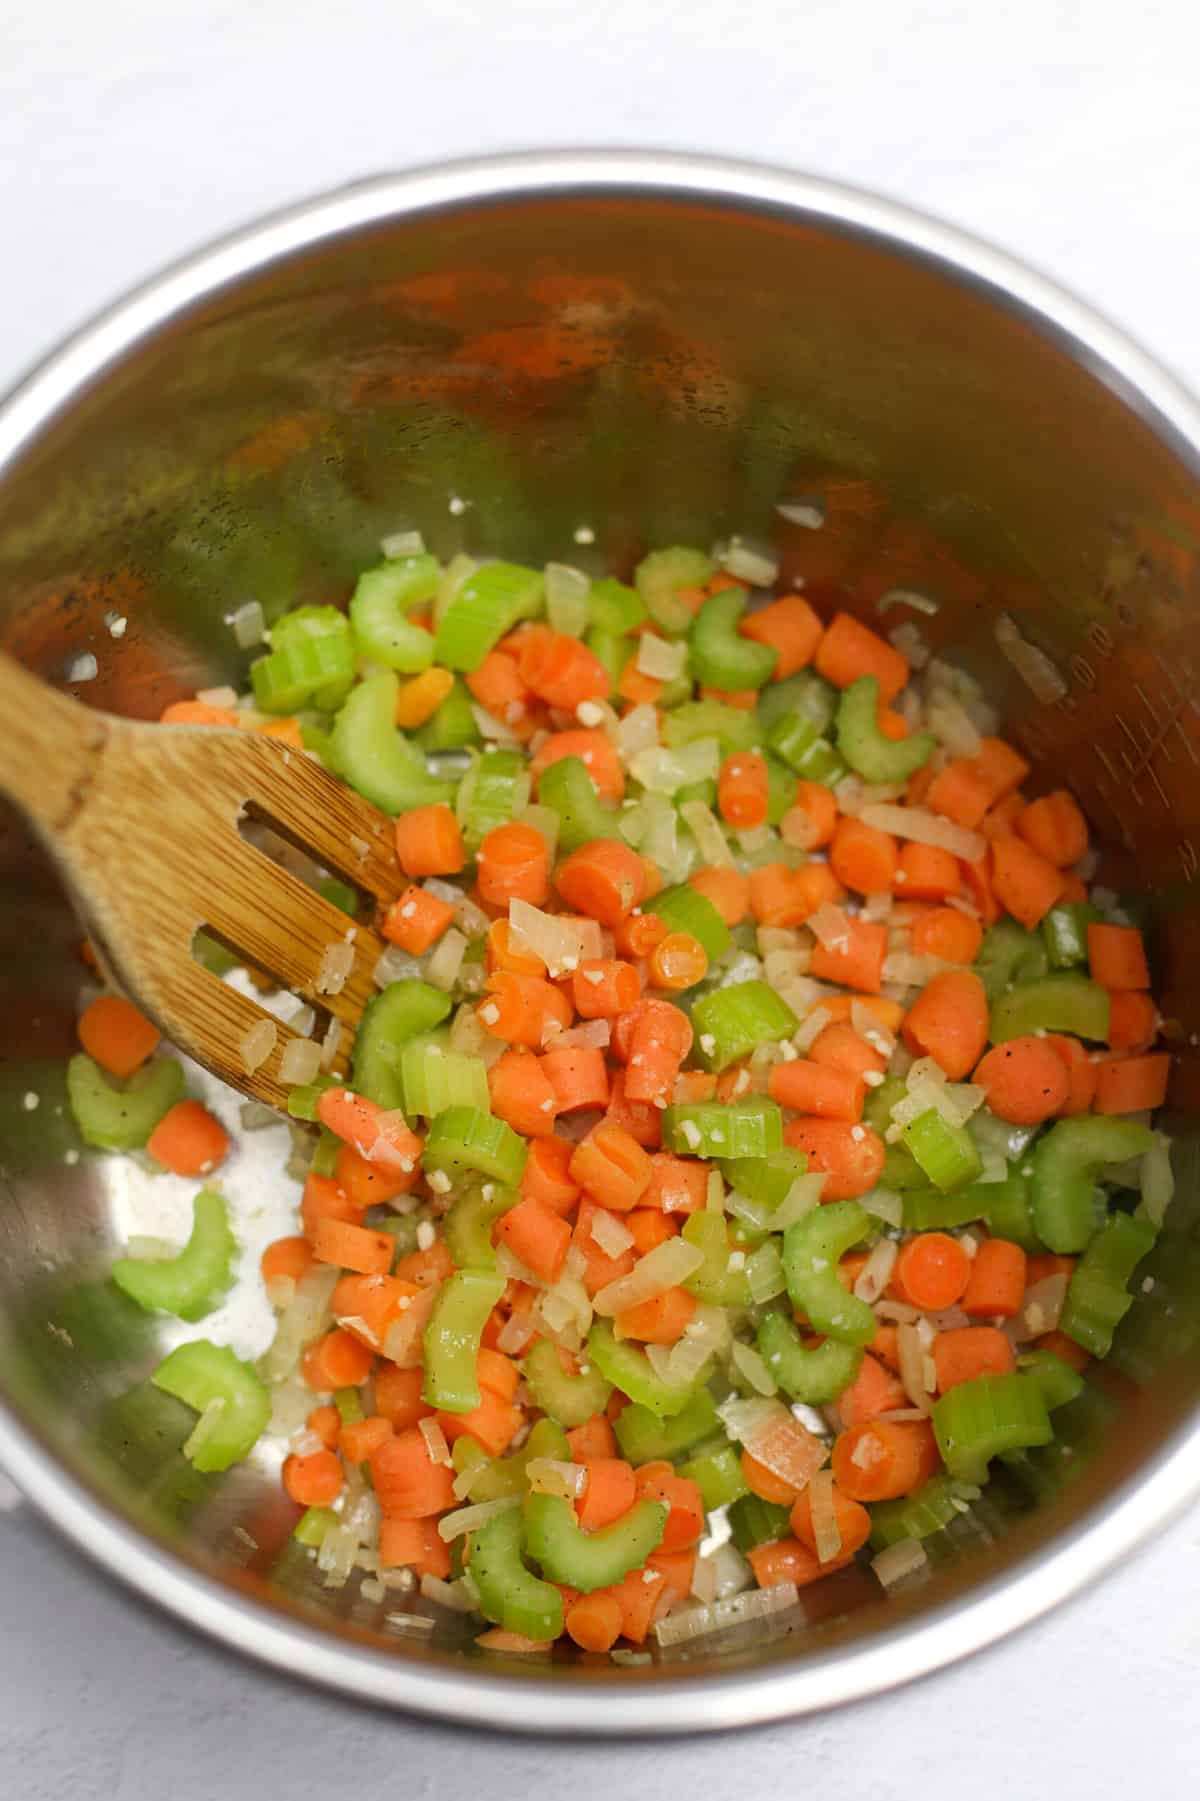 Chopped celery, onion, and carrots sauteed in an instant pot bowl.